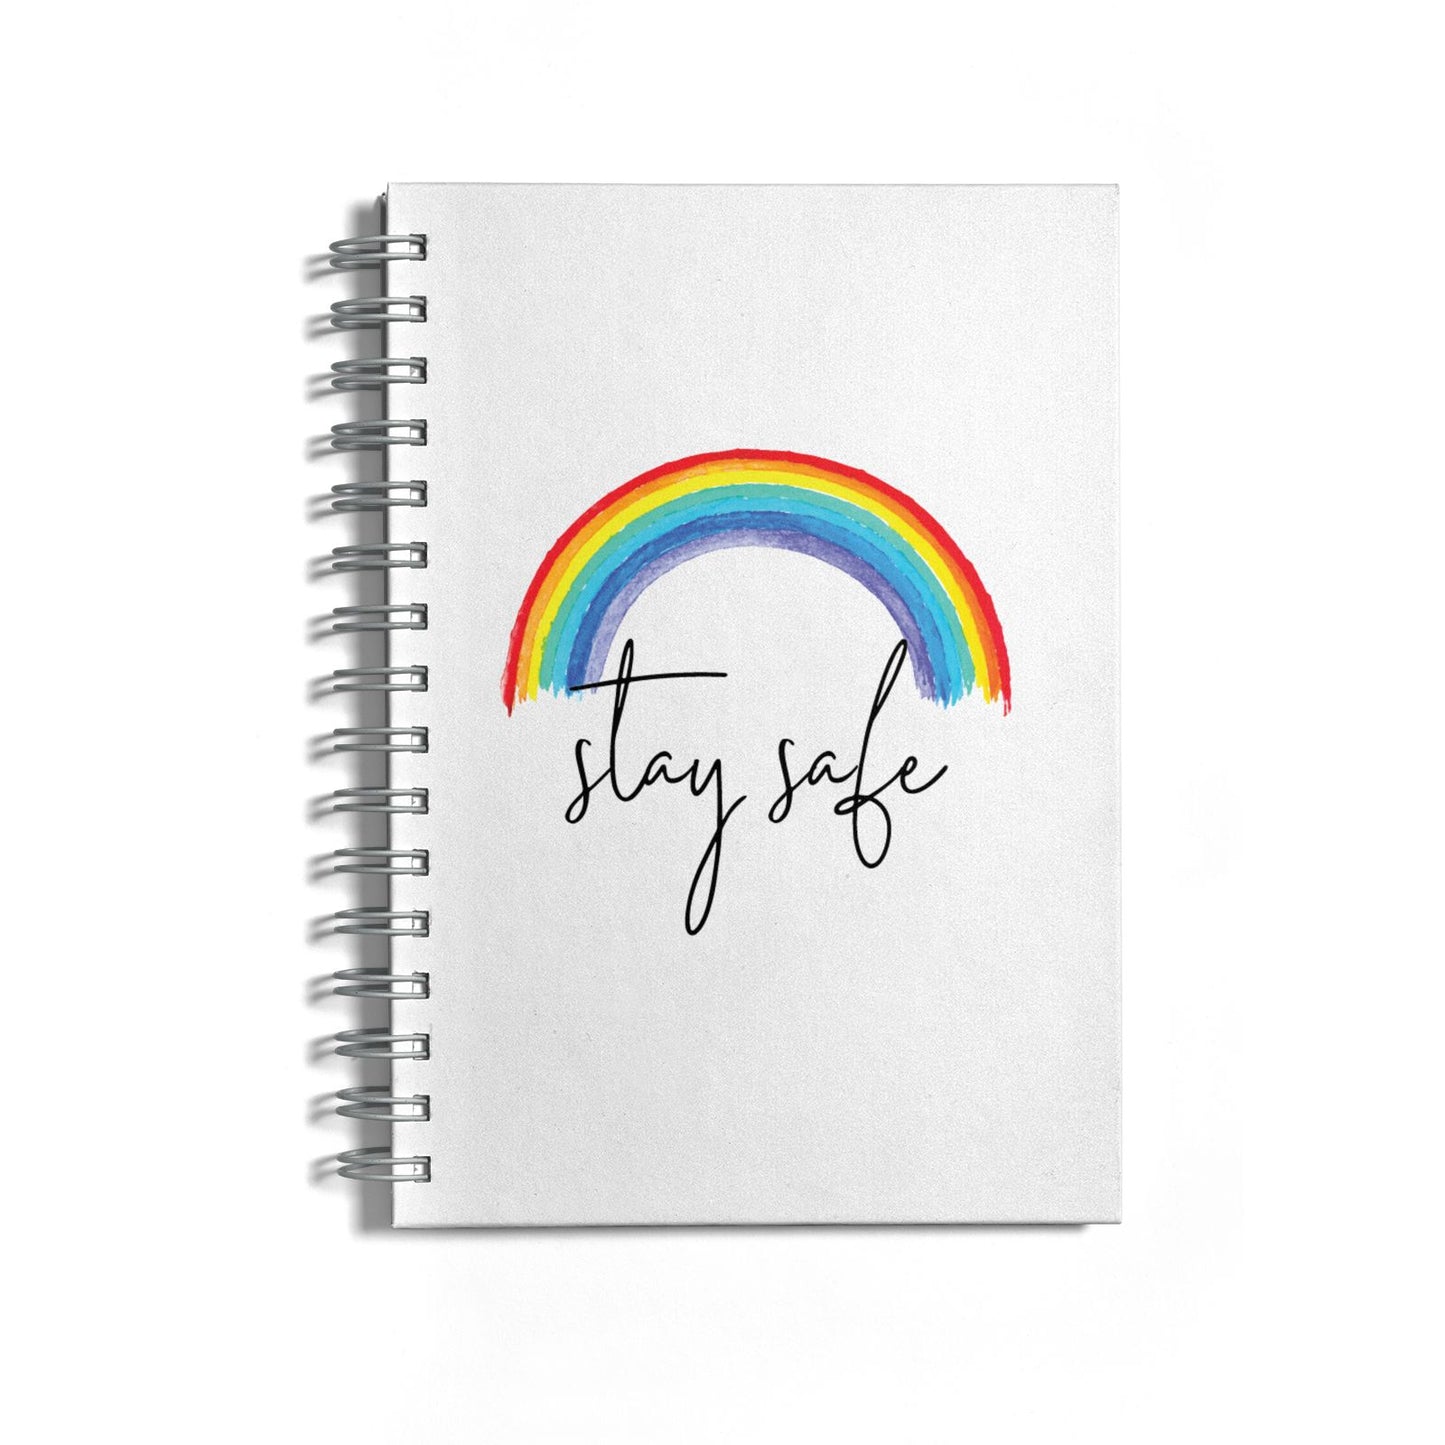 Stay Safe Rainbow Notebook with Grey Coil